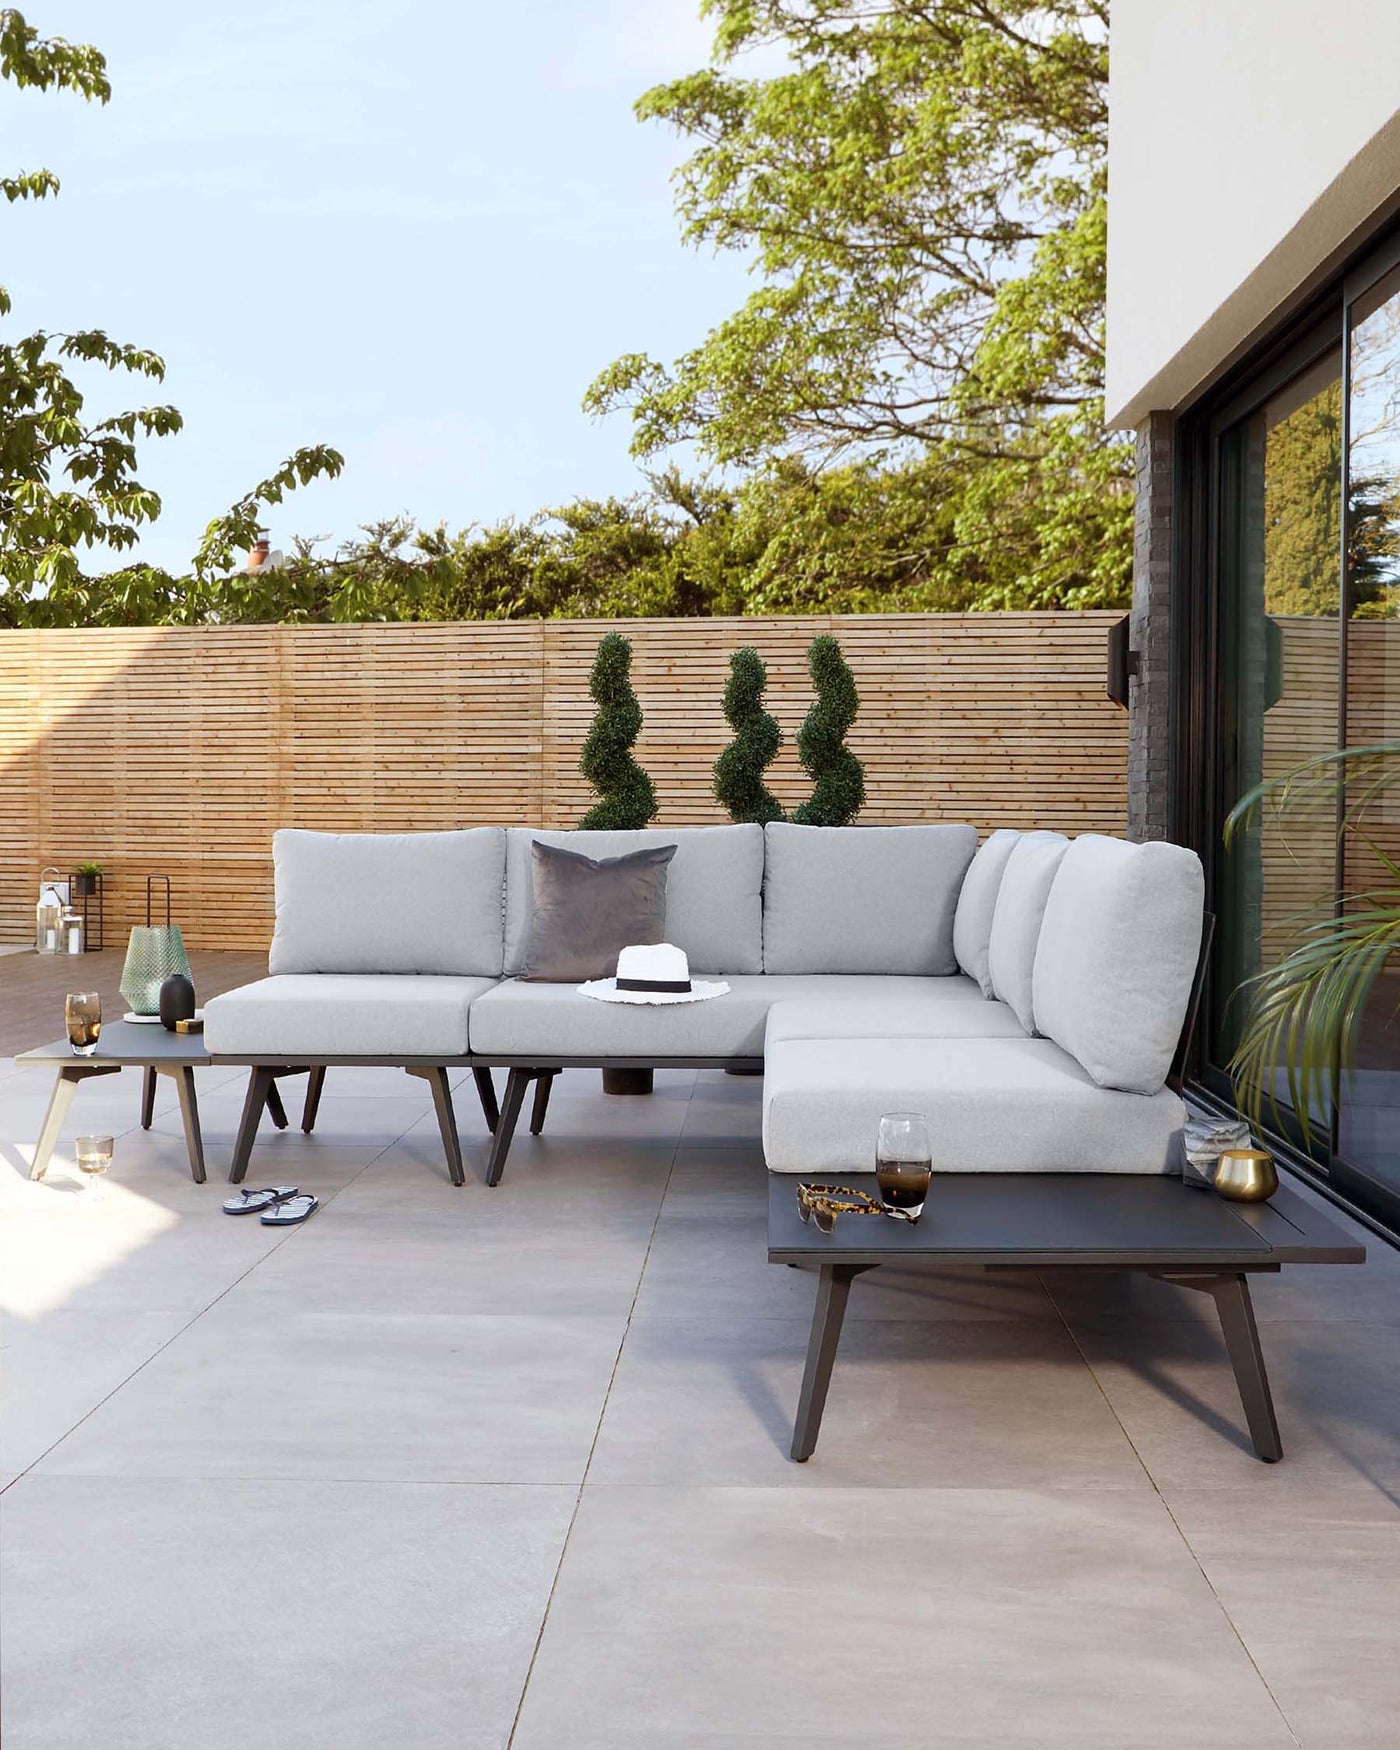 Modern outdoor sectional sofa in light grey with matching low-profile coffee table on a patio set against a natural backdrop.